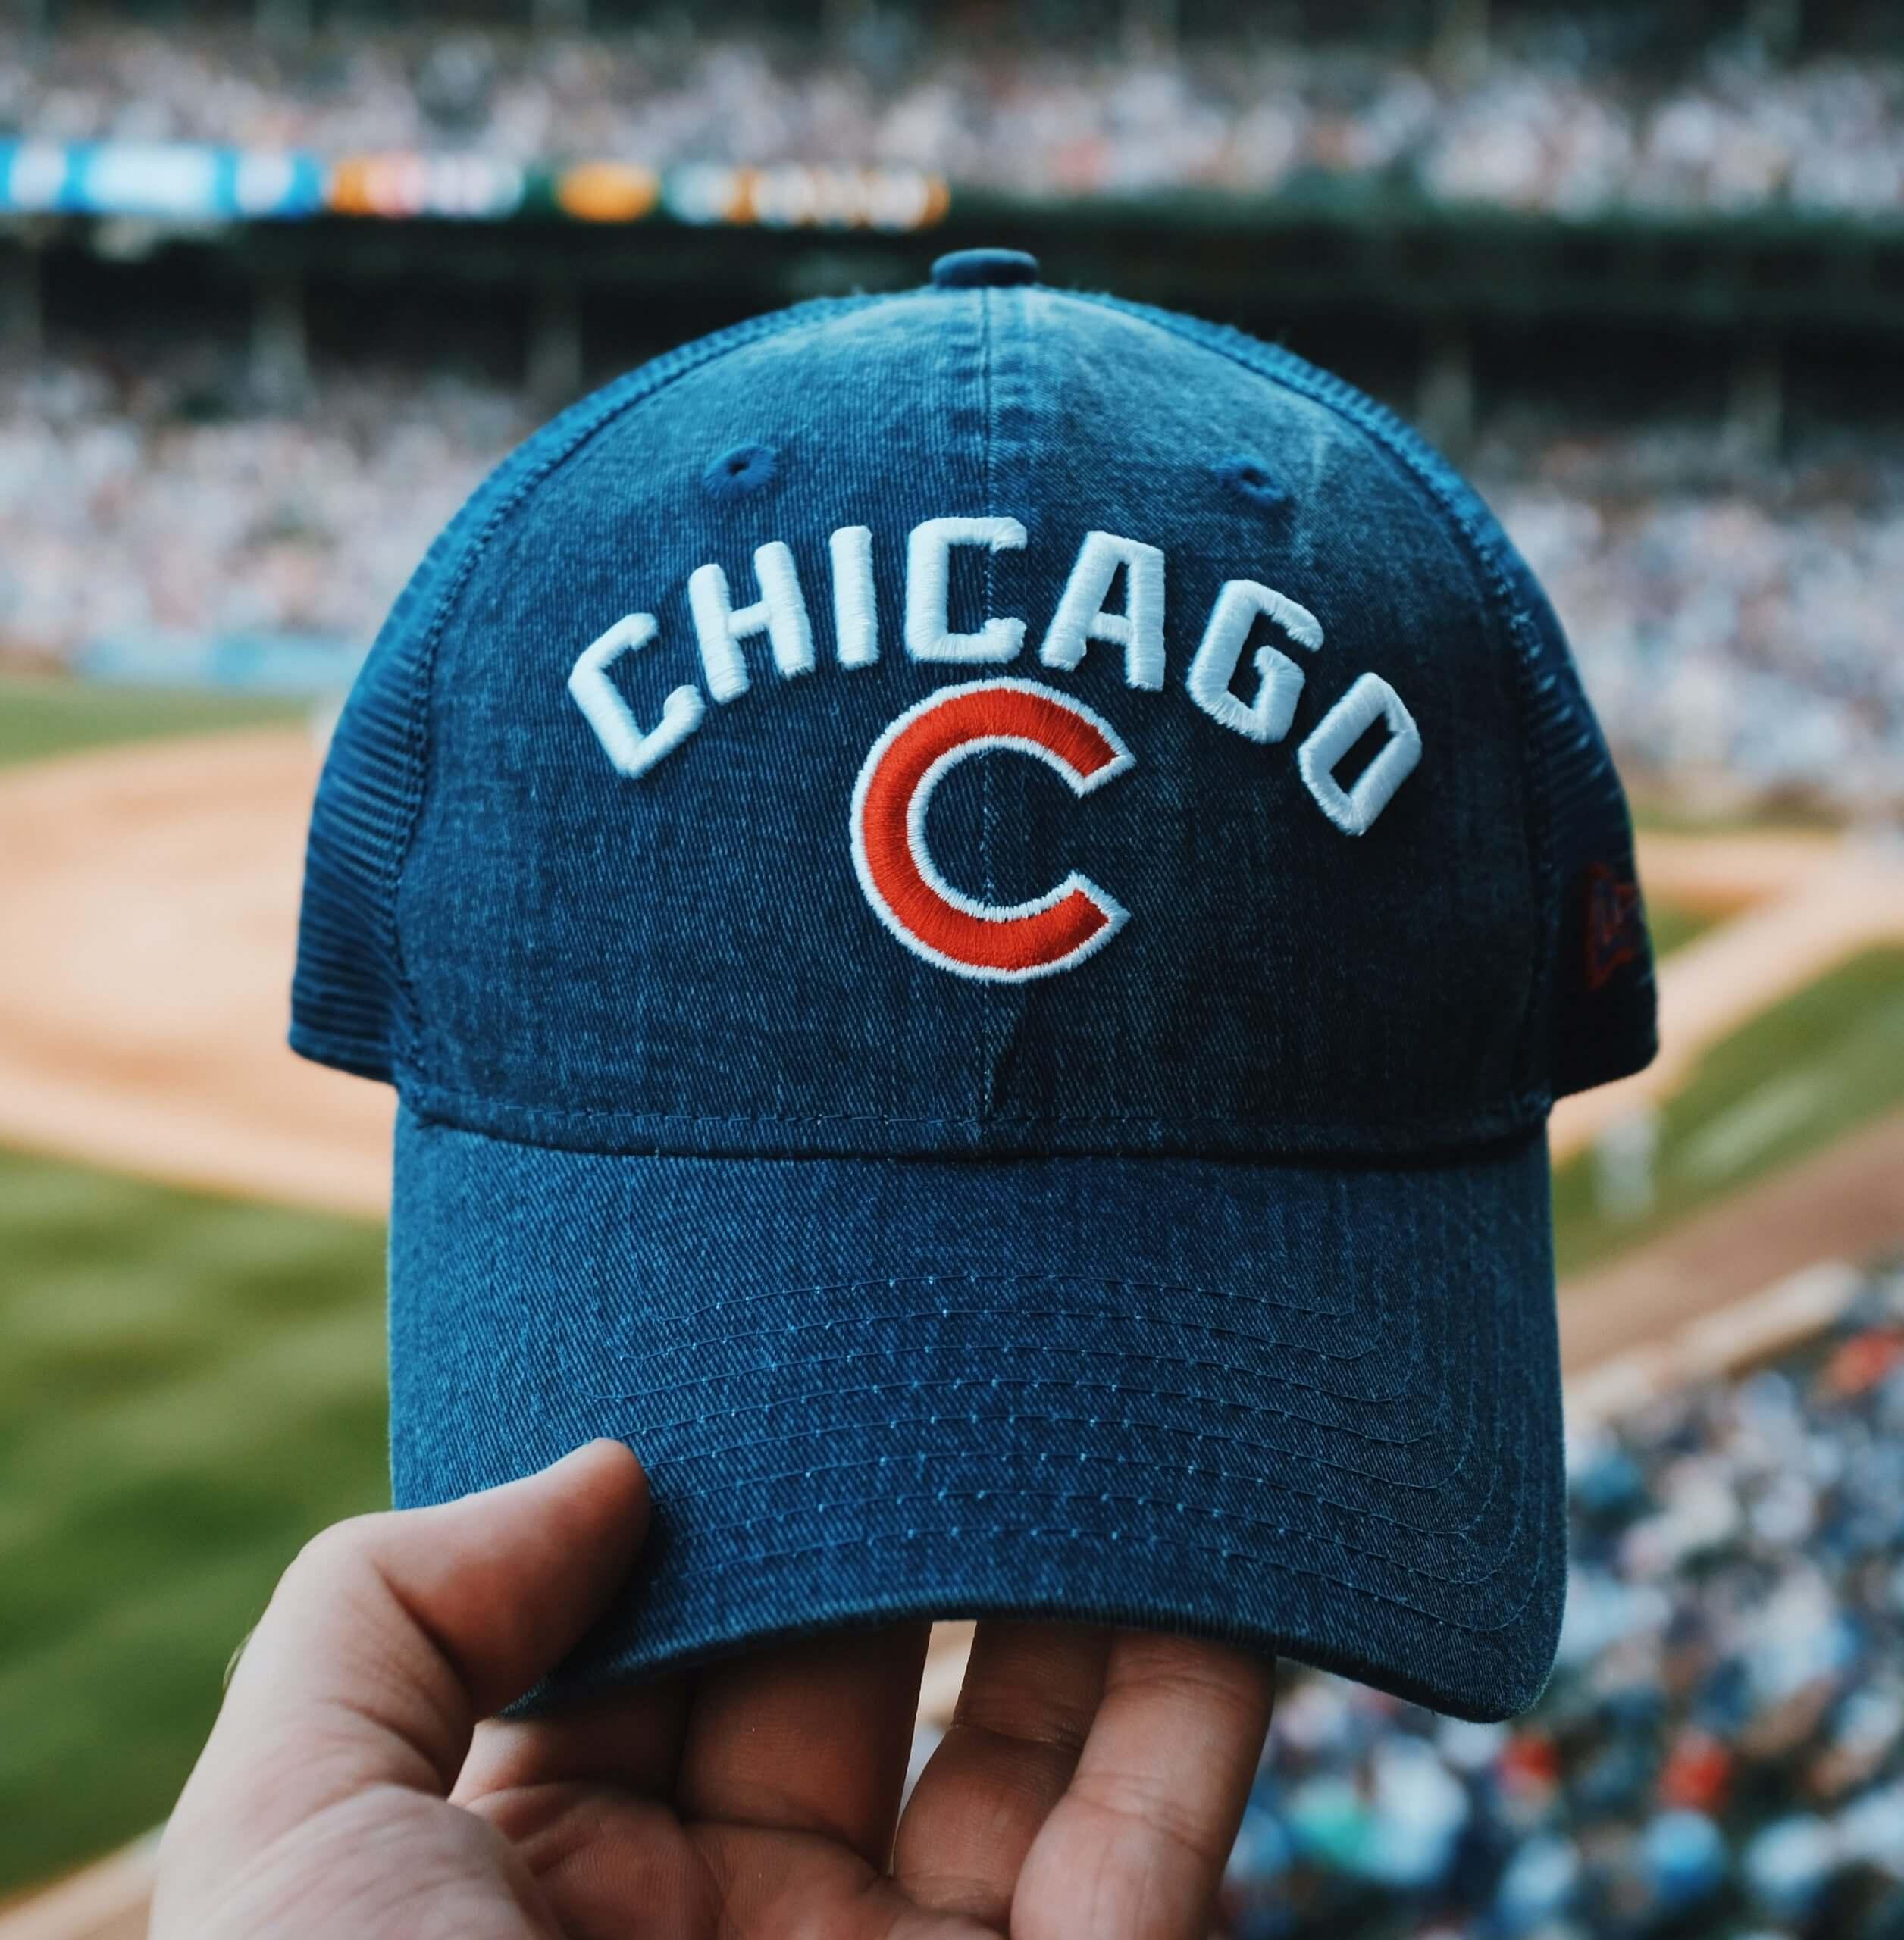 Person holding a Chicago cubs hat in front of Wrigley Field